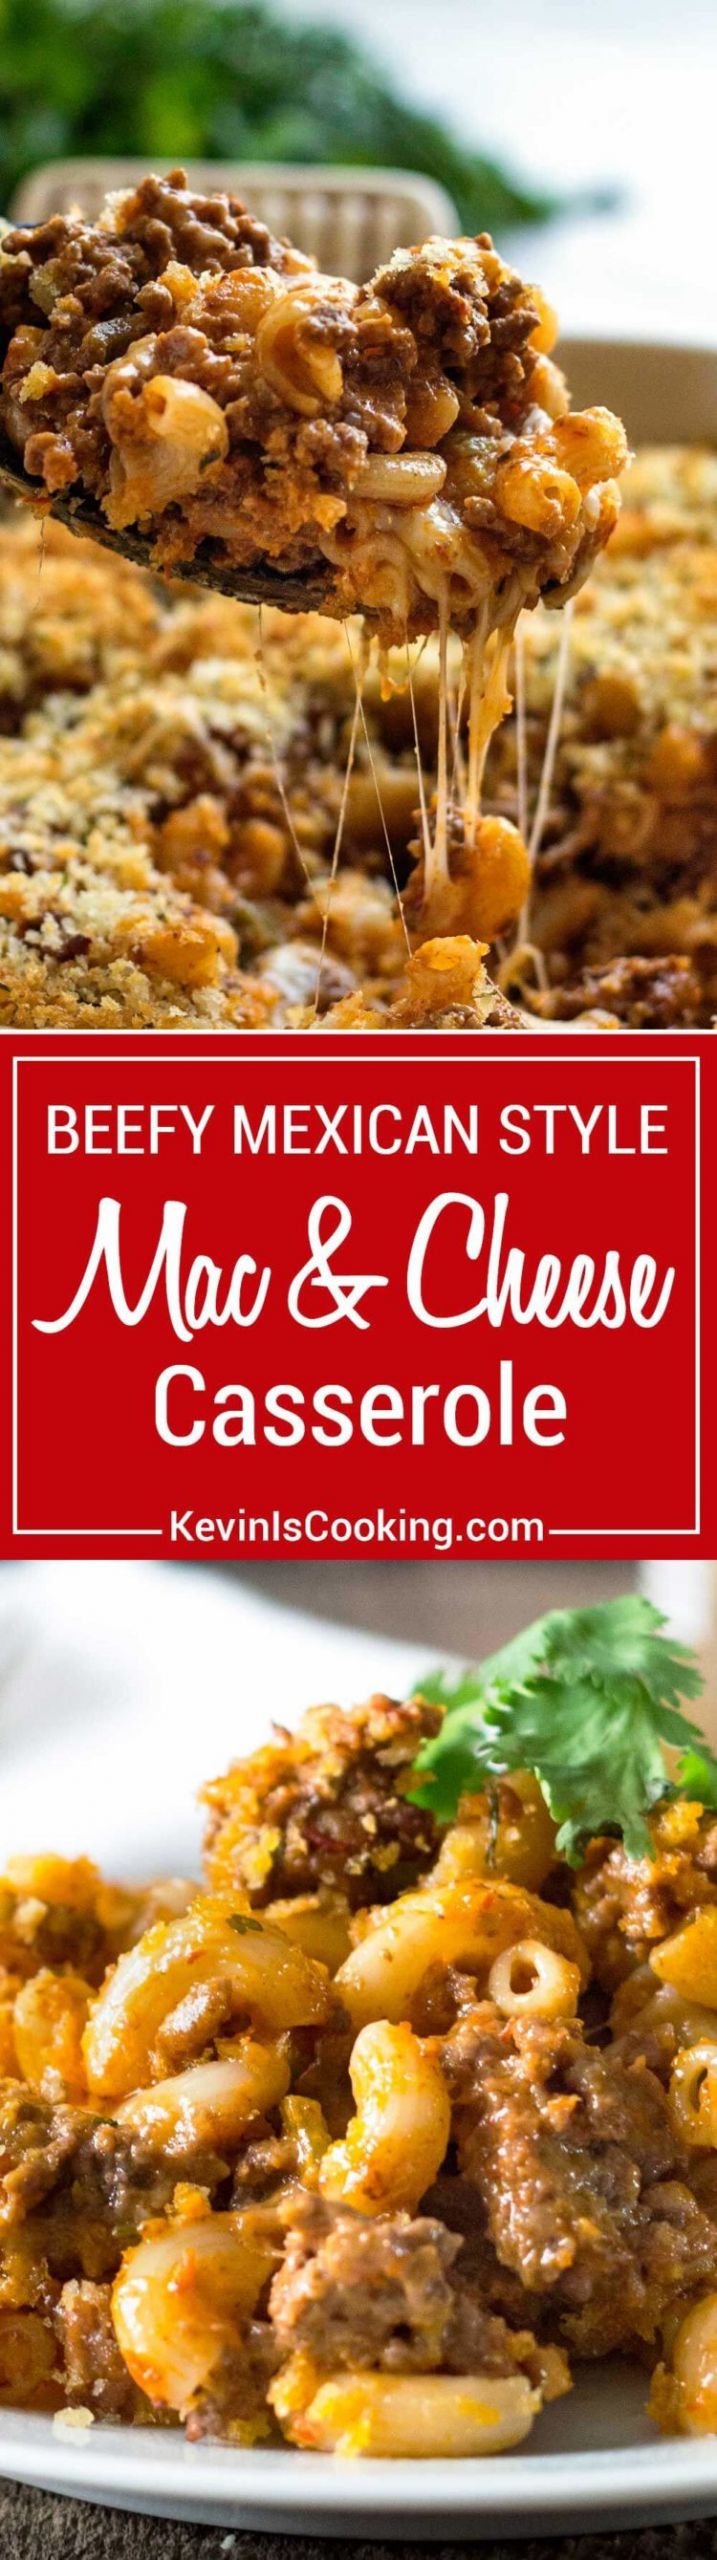 Mexican Mac And Cheese Casserole
 Chili Mac and Cheese Casserole keviniscooking